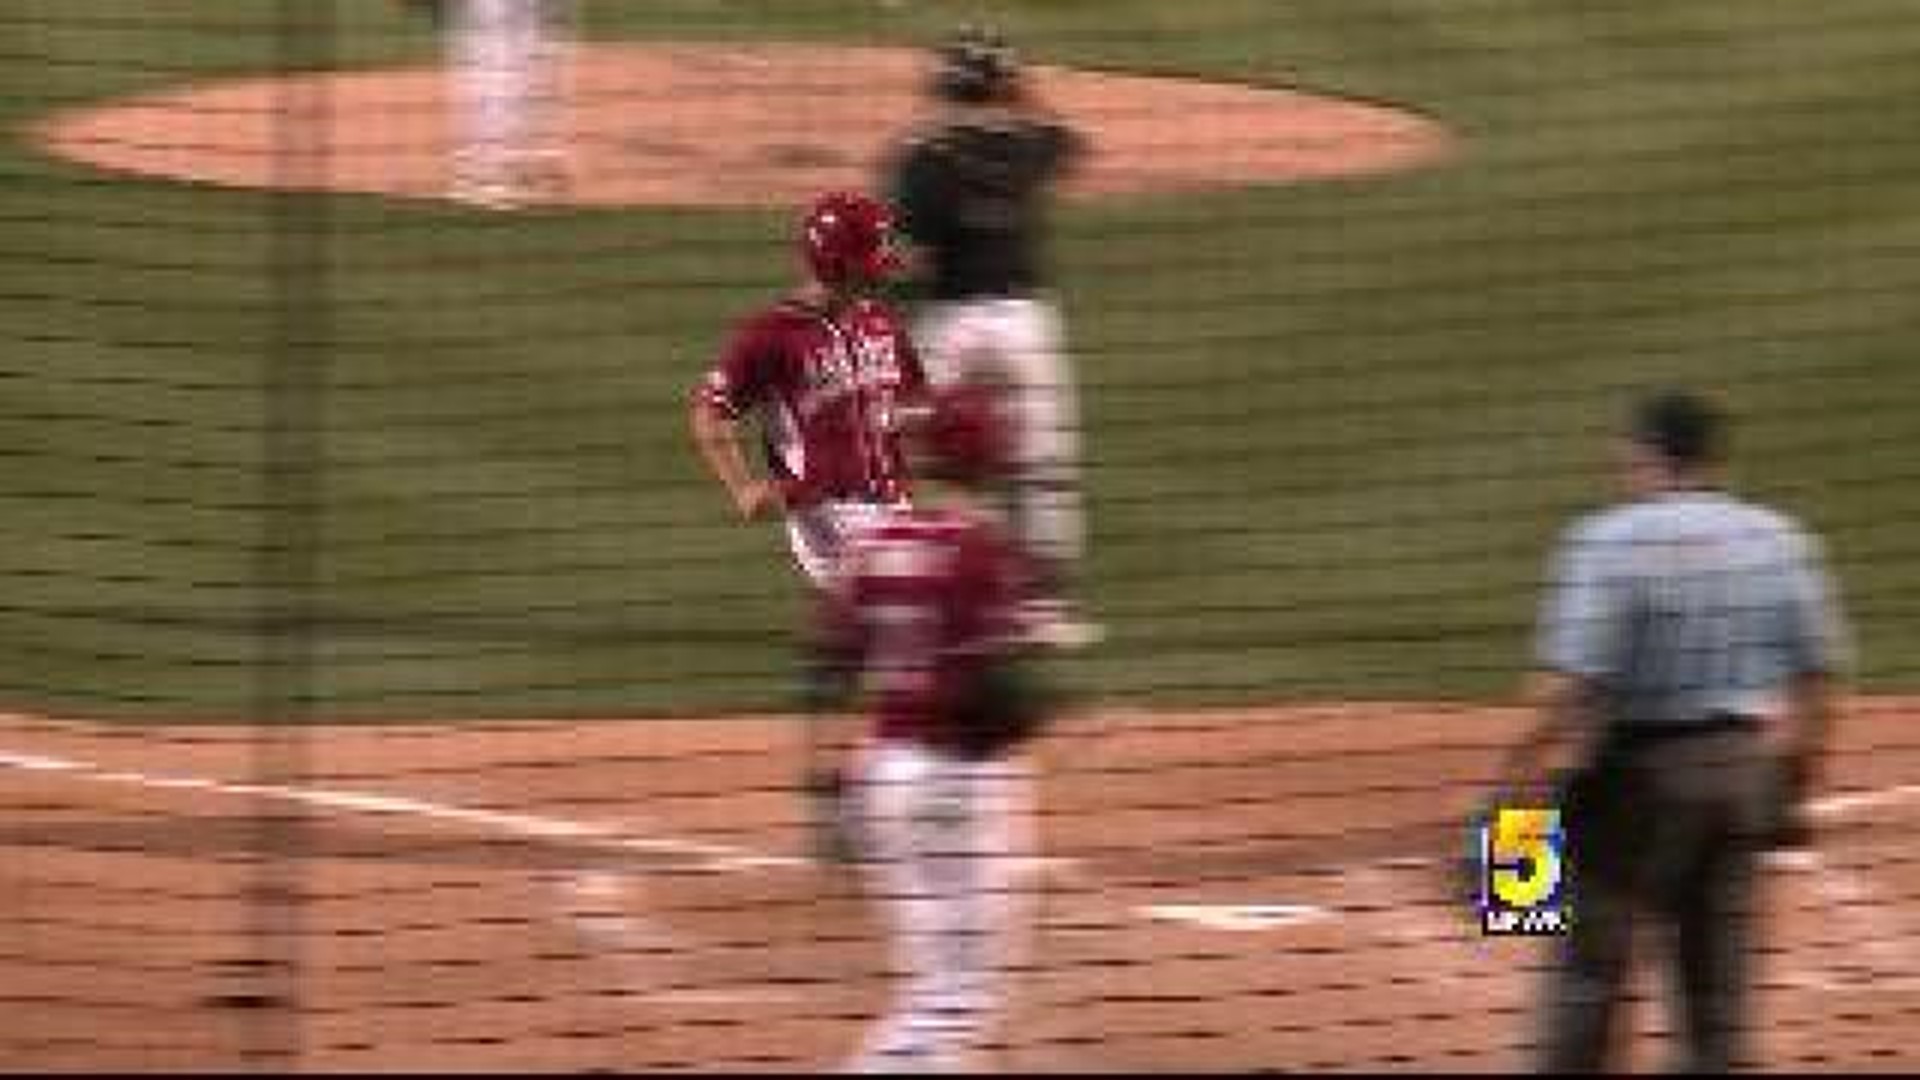 Diamond Hogs Open Series With a Win